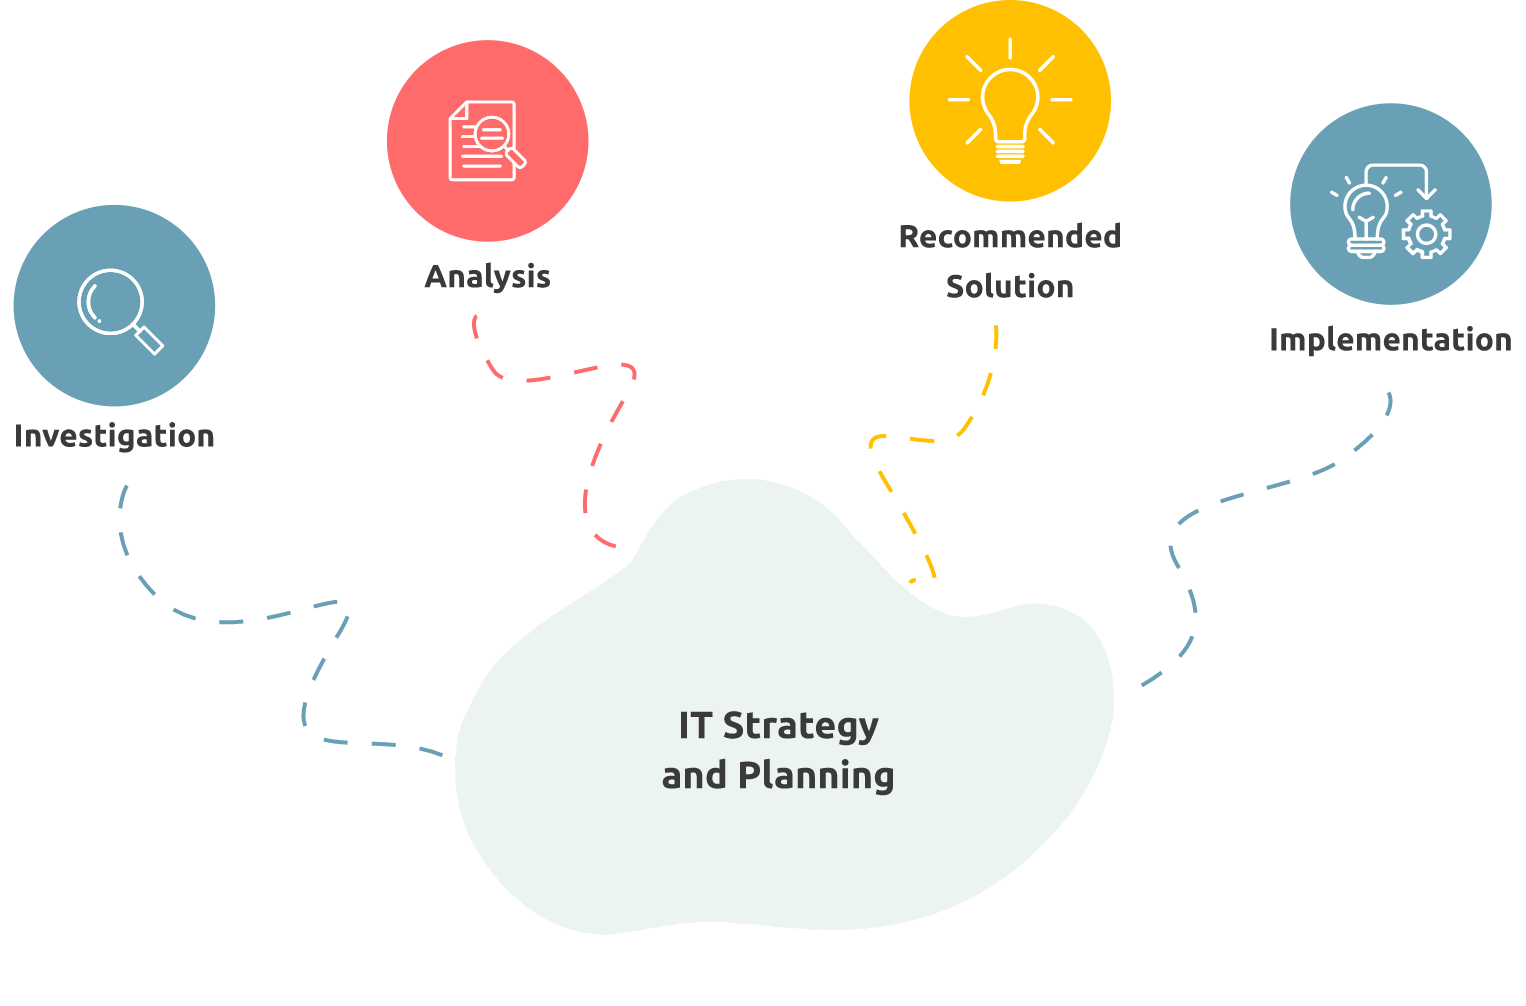 IT Strategy and Planning illustrated: Aligning technology goals with business objectives for long-term success.